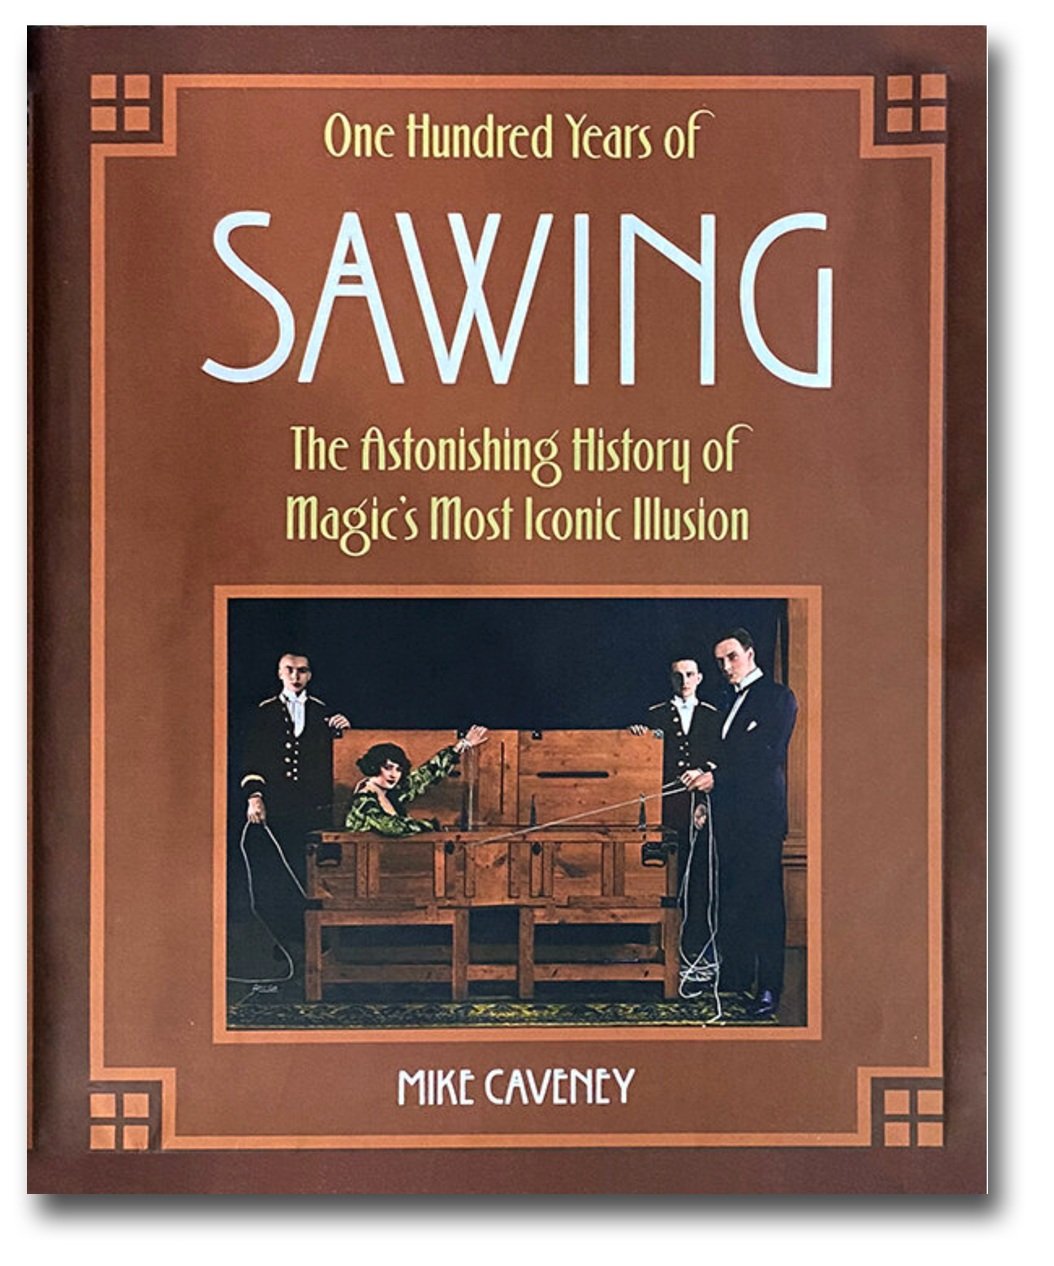 Sawing　100　of　Years　Mike　—　Caveney's　Magic　Words